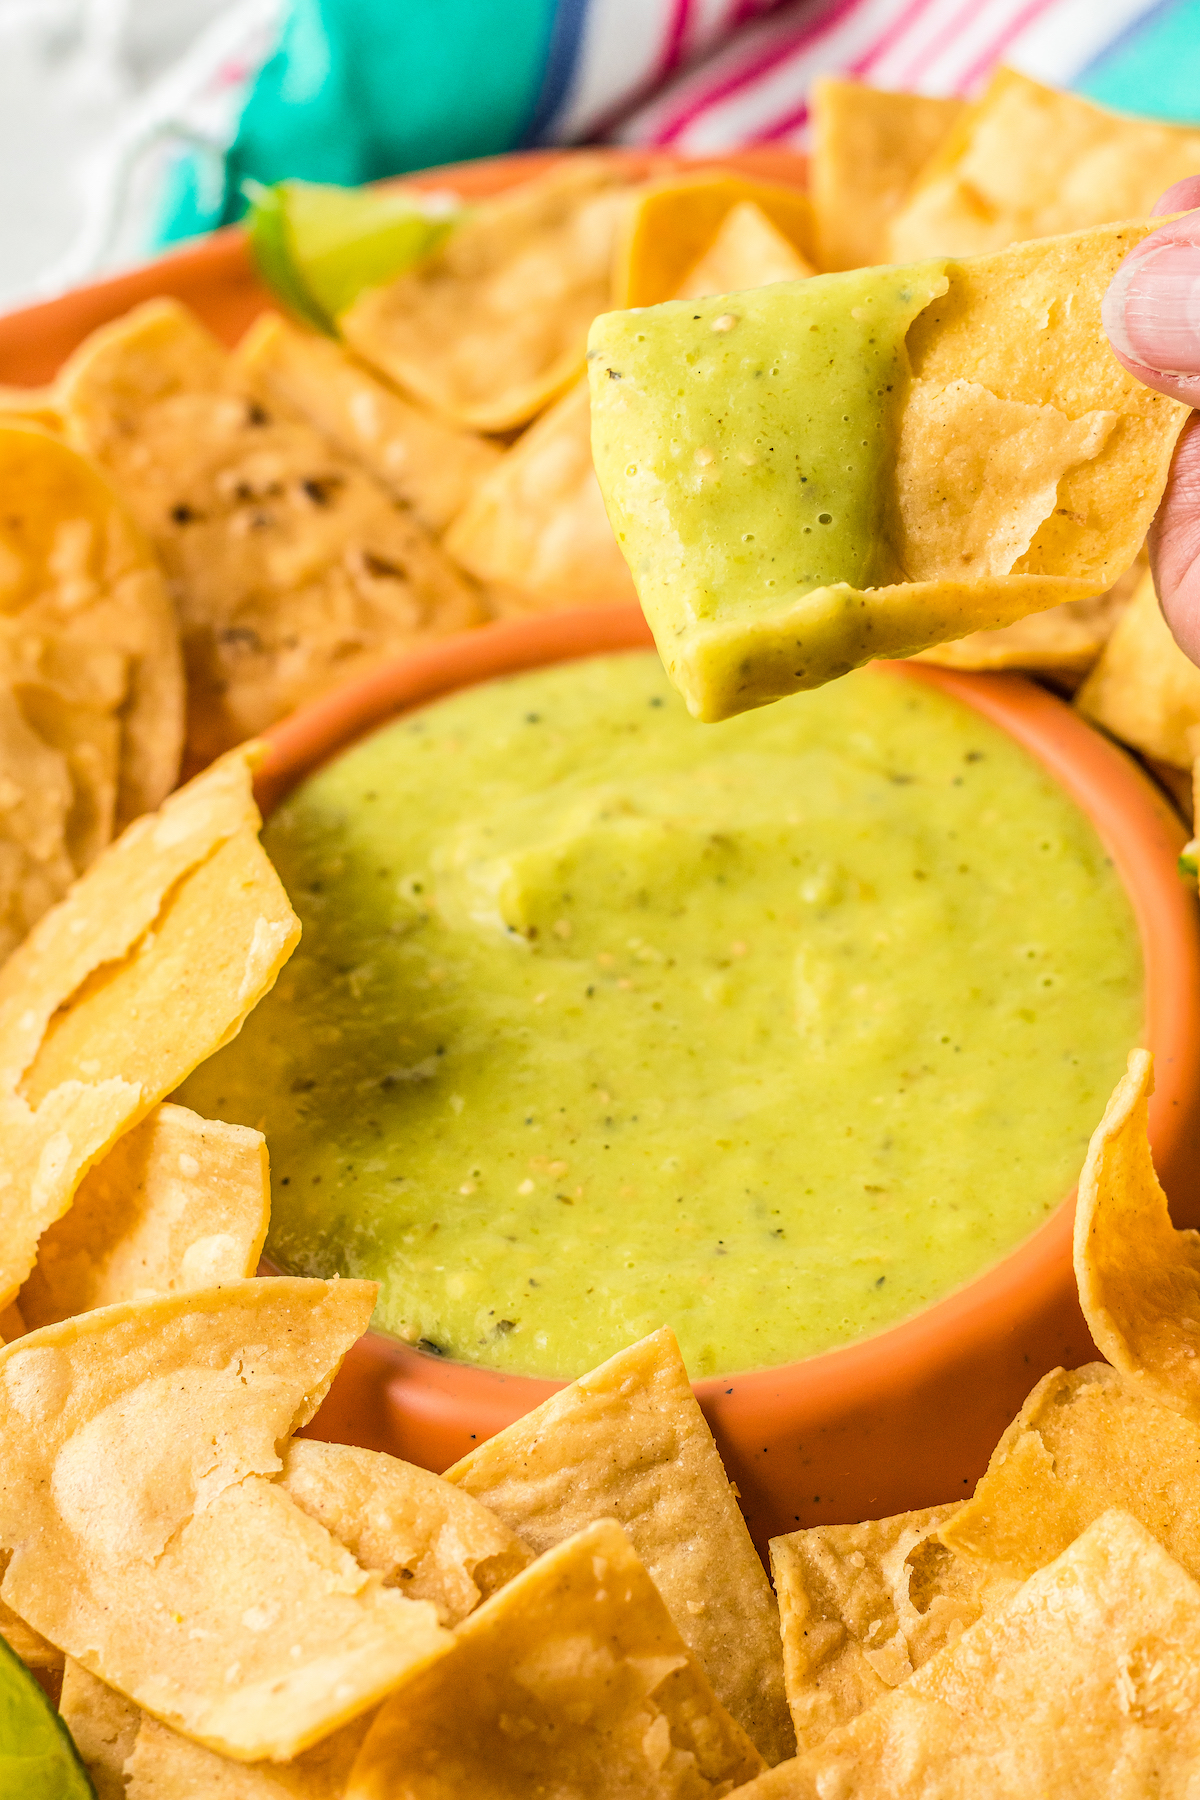 A platter of chips and salsa. One chip has been dipped into the salsa and lifted toward the camera.